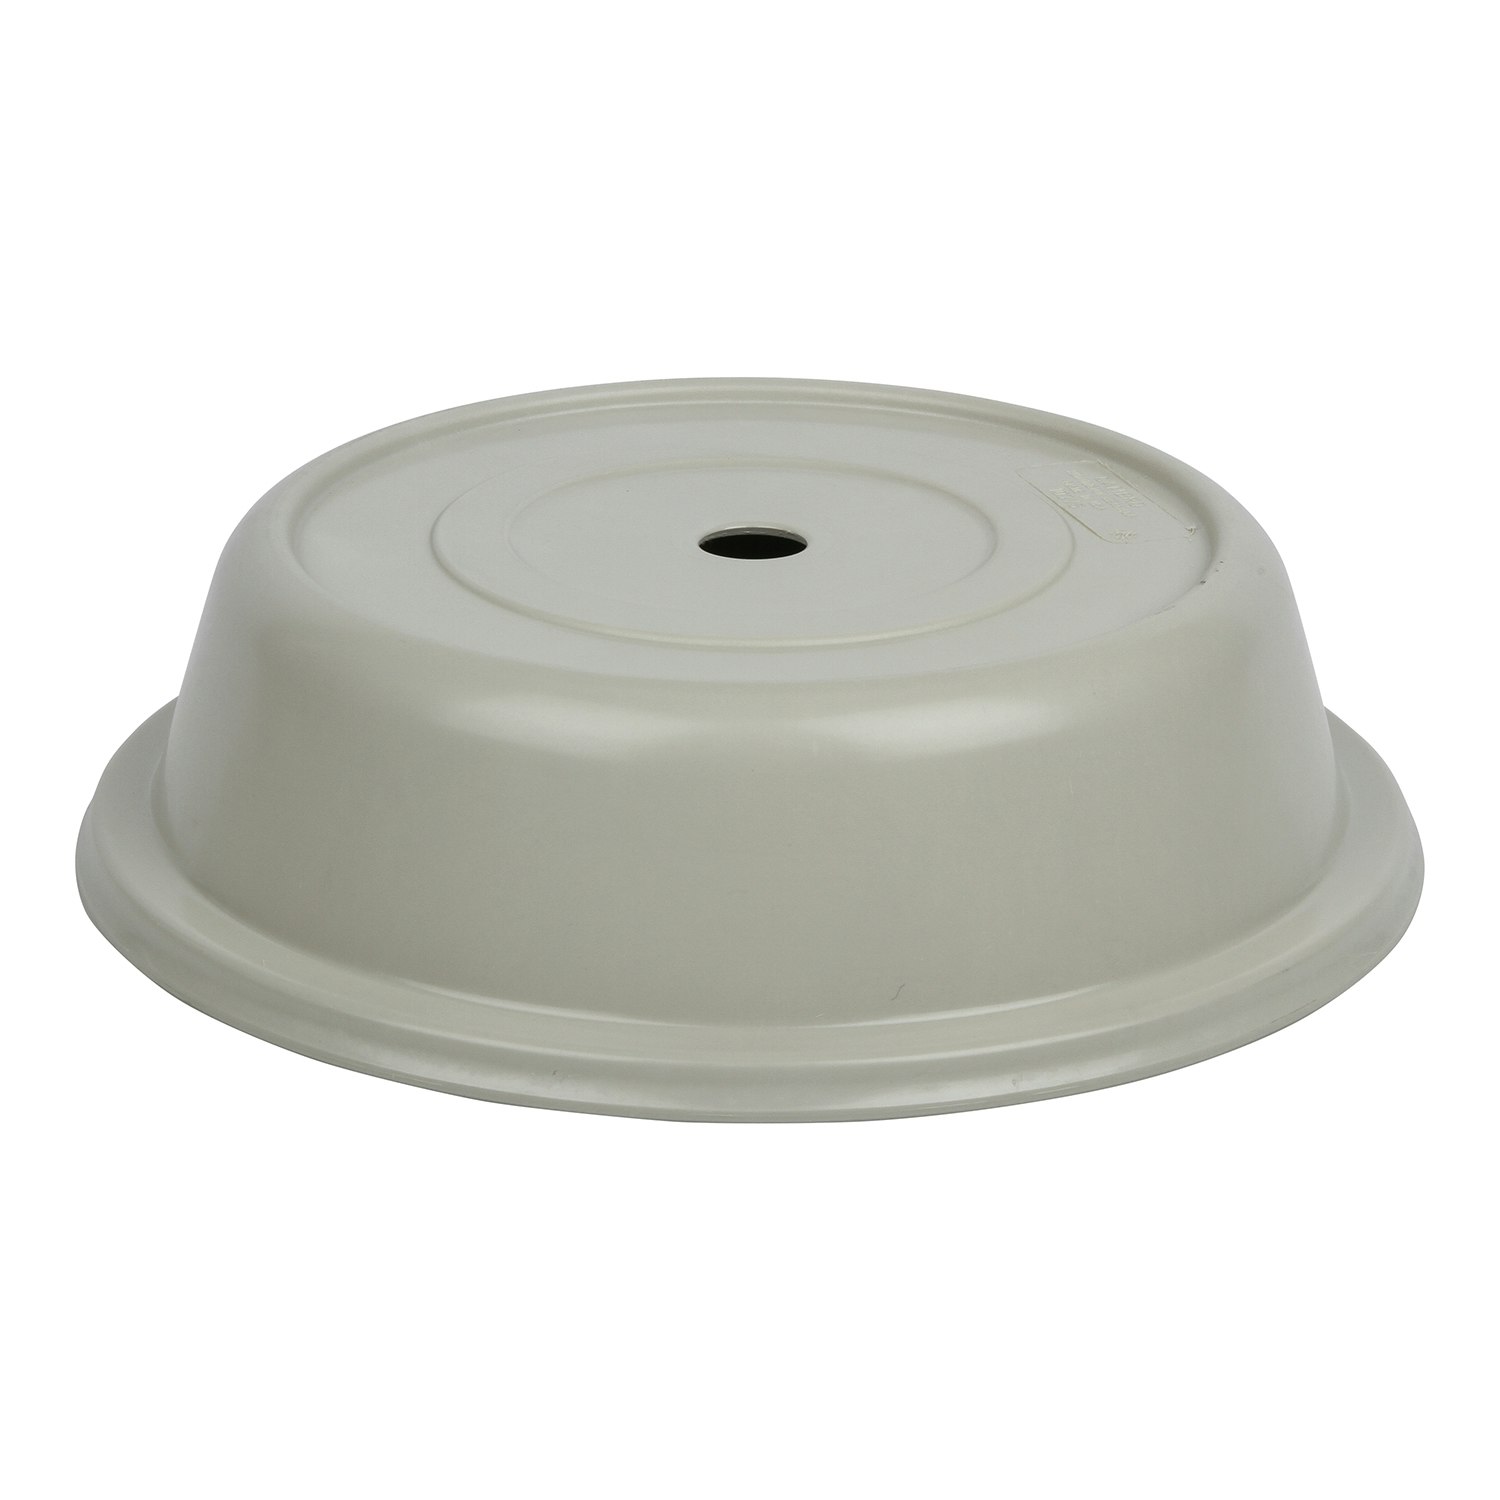 9" PLATE COVER COMMERCIAL, CAMBRO CAMCOVER 